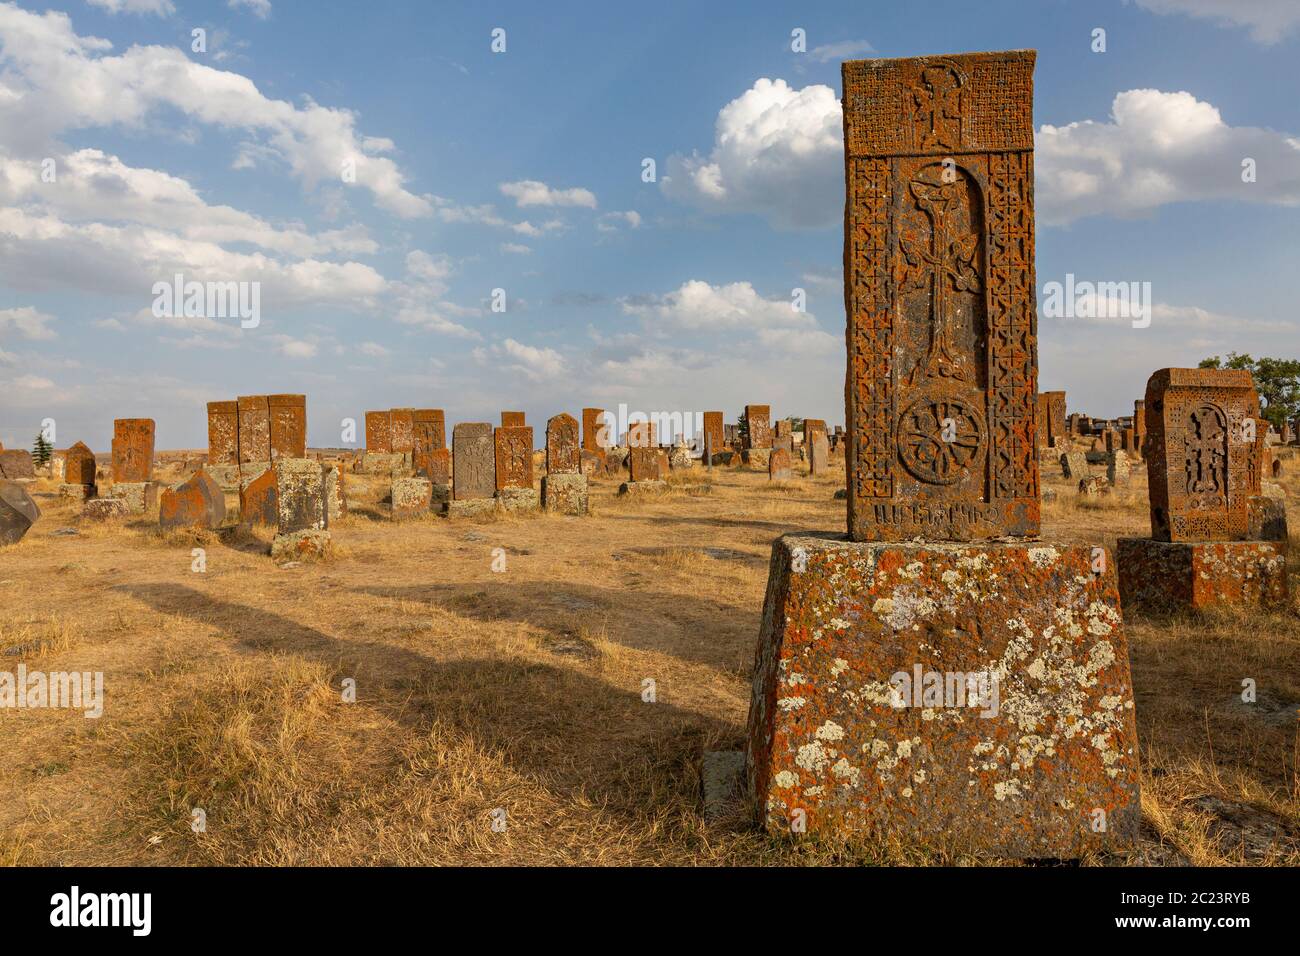 Ancient tombs and headstones known as Khachkar, in the historical cemetery of Noratus in Armenia. Stock Photo